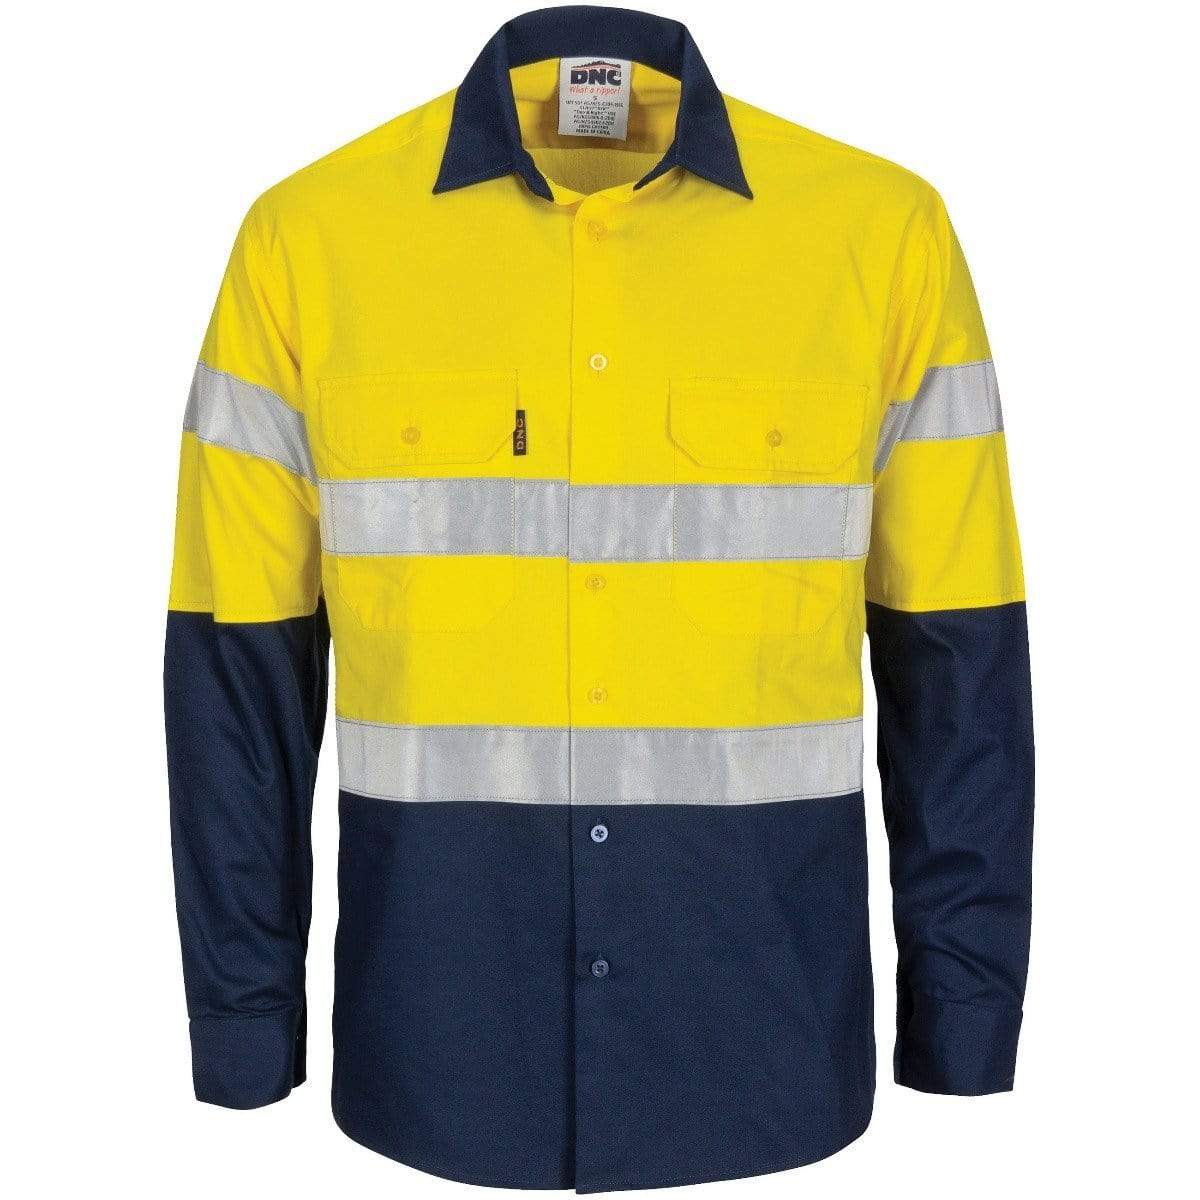 Dnc Workwear Hi-vis R/w Cool-breeze T2 Vertical Vented Long Sleeve Cotton Shirt With Gusset Sleeves, Generic R/tape - 3782 Work Wear DNC Workwear Yellow/Navy XS 